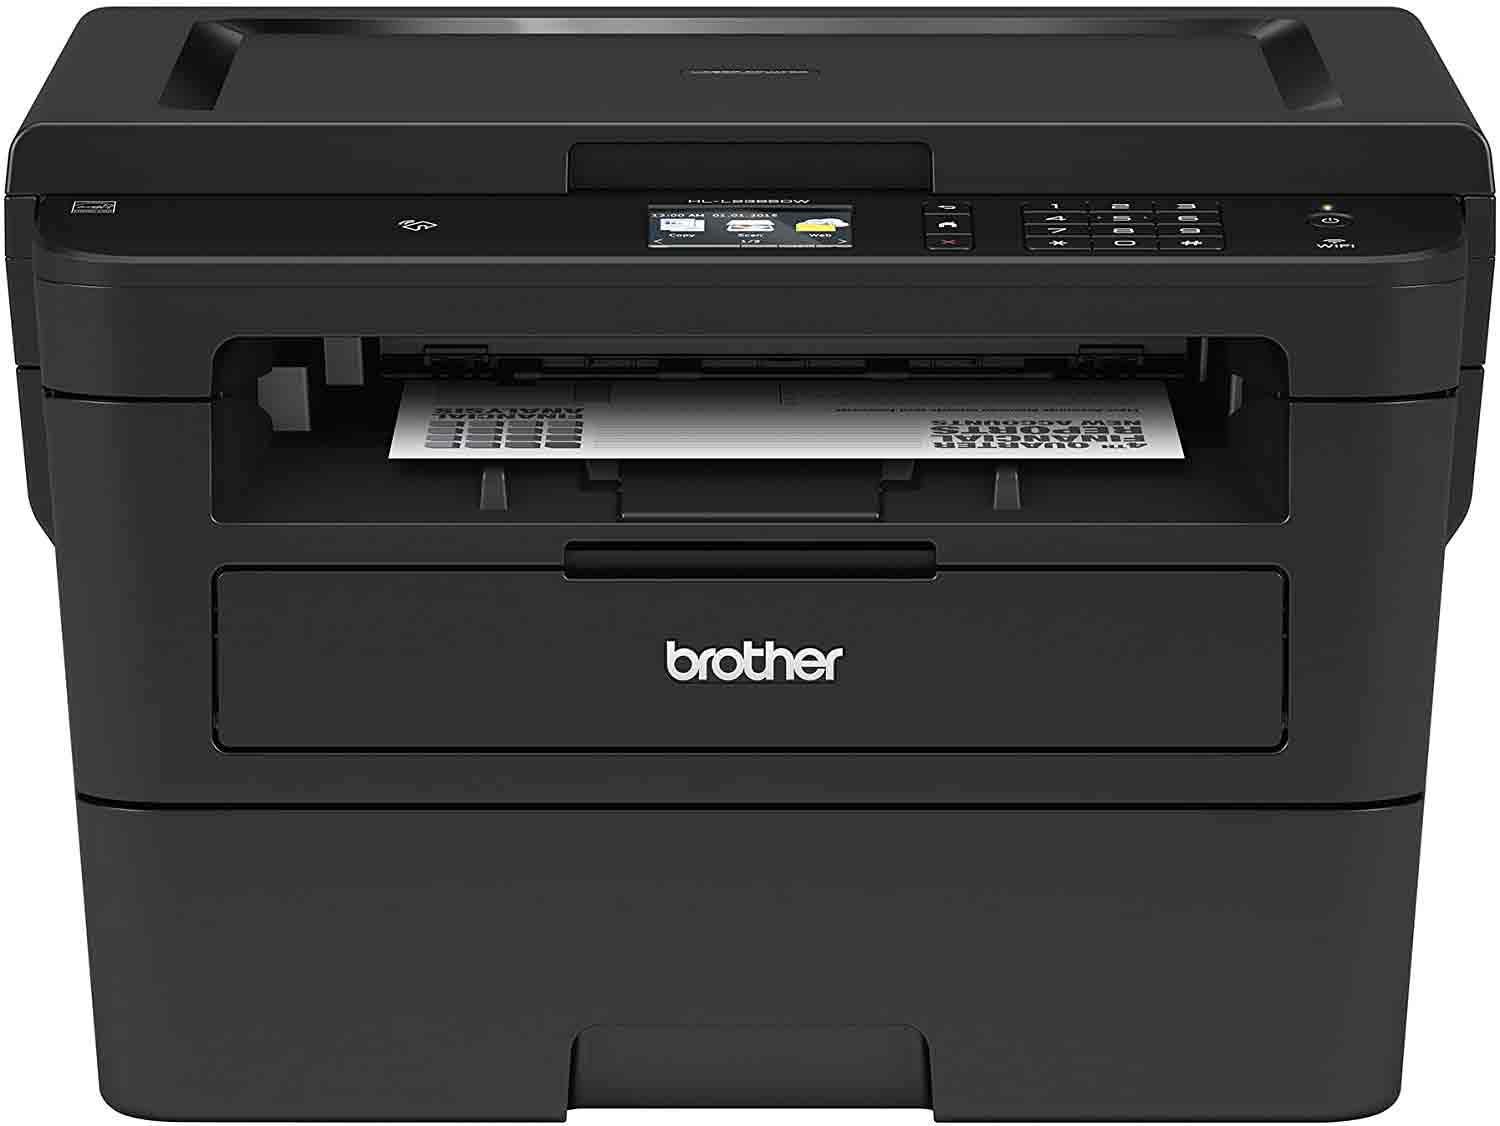 Brother Compact Monochrome Laser Printer, HLL2395DW, Flatbed Copy & Scan, Wireless